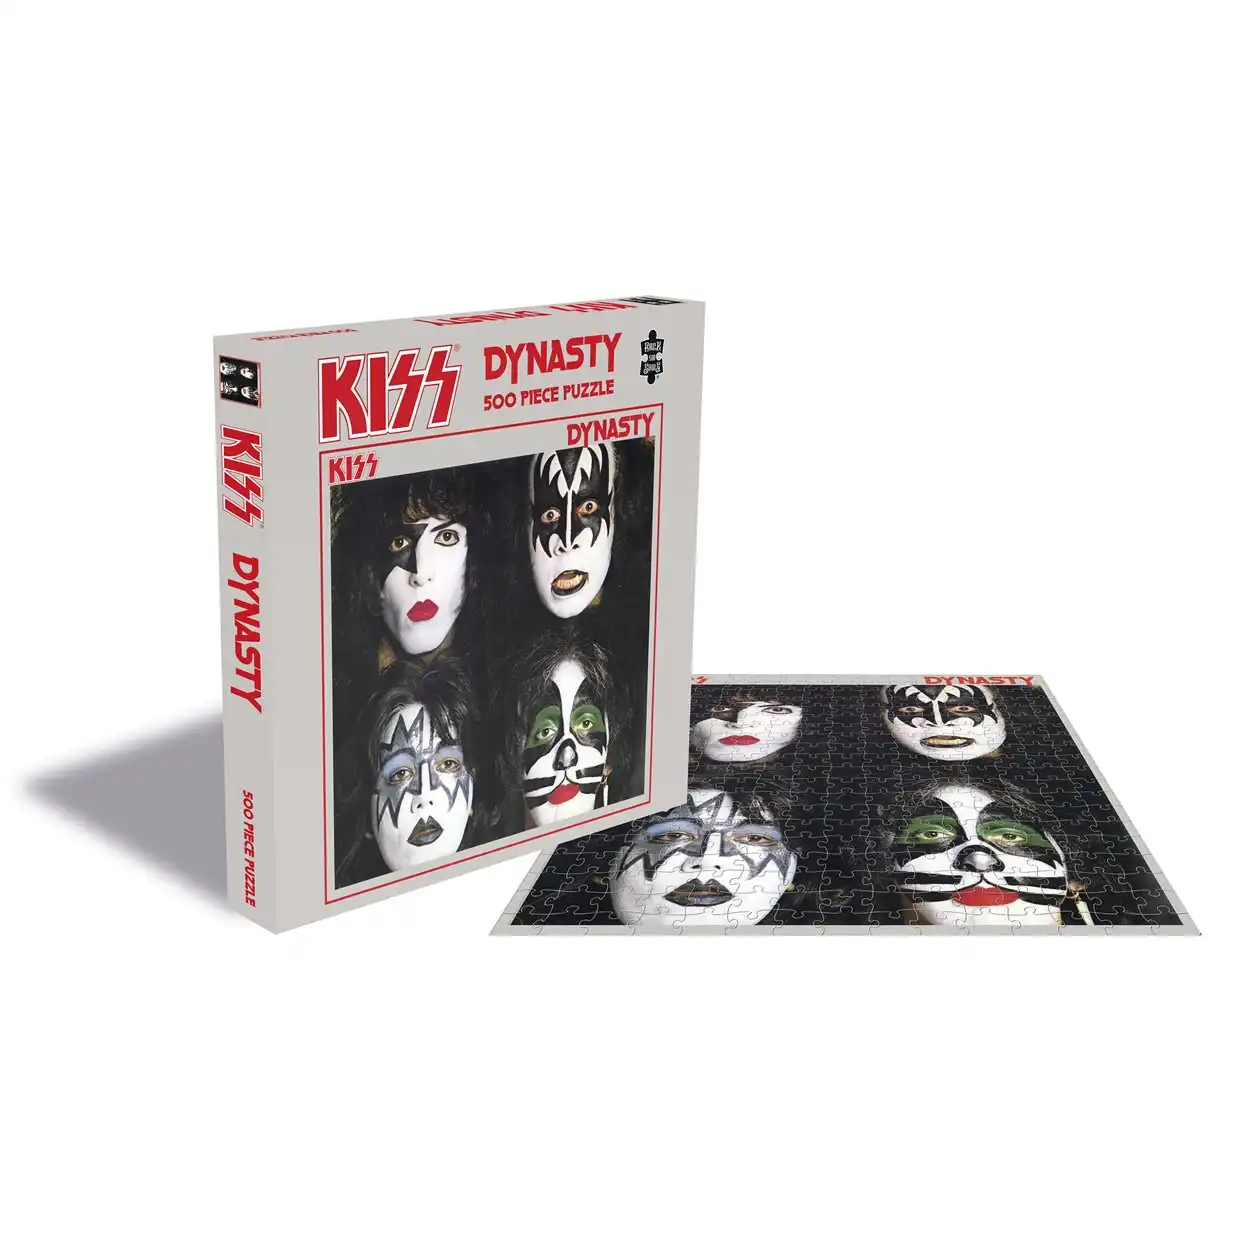 KISS - Dynasty 500pc Puzzle